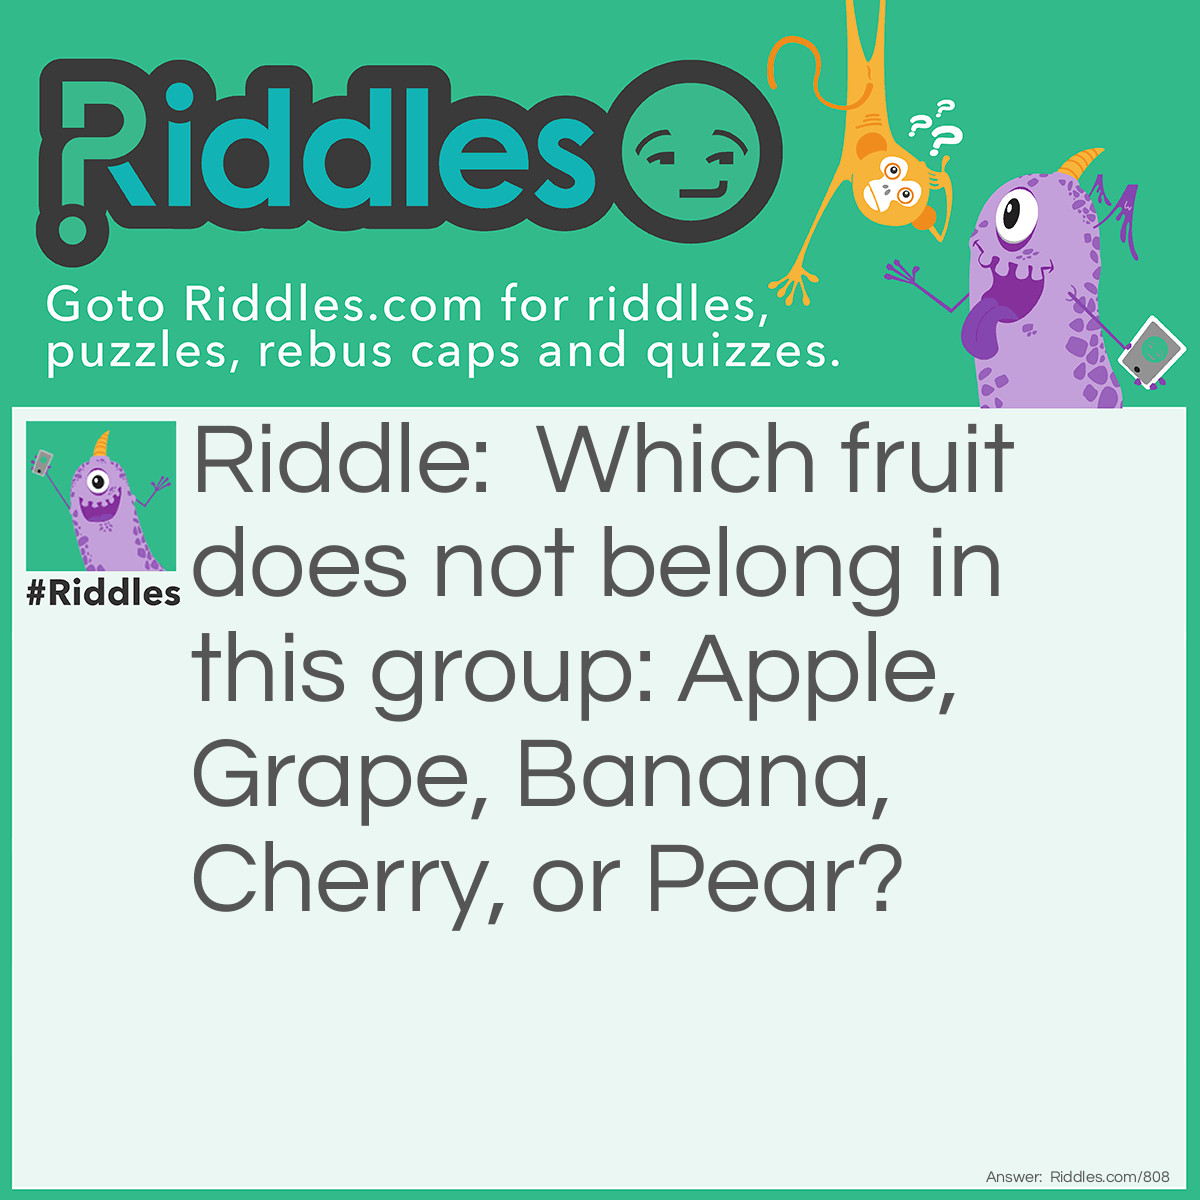 Riddle: Which fruit does not belong in this group: Apple, Grape, Banana, Cherry, or Pear? Answer: The Banana. It's the only one that needs to be peeled before eating.